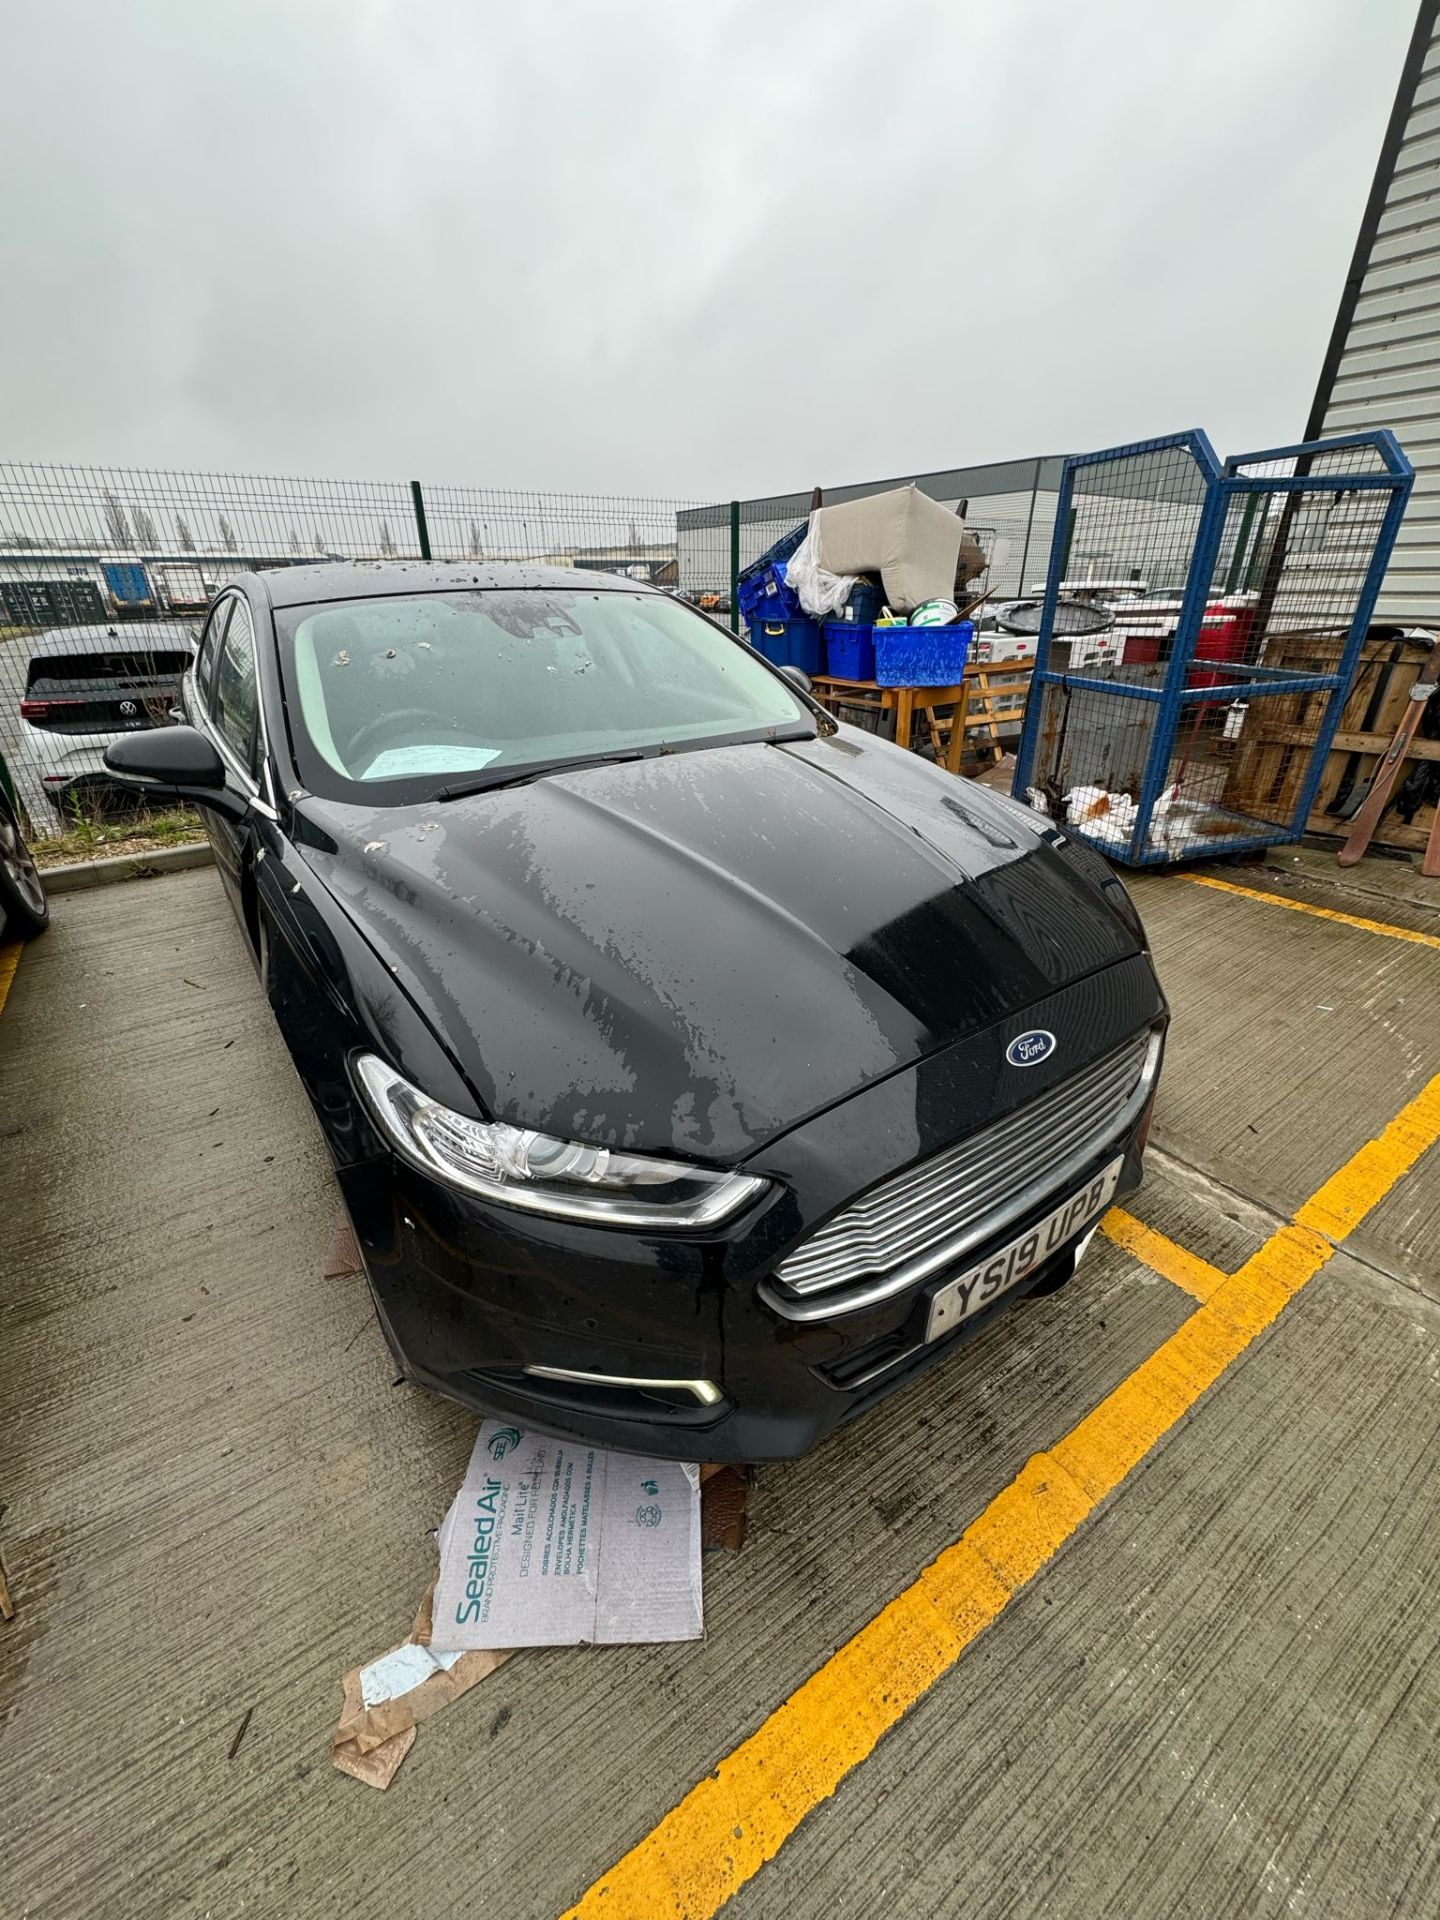 NO RESERVE - 2019, FORD Mondeo (Ex-Fleet Vehicle) - Image 18 of 19